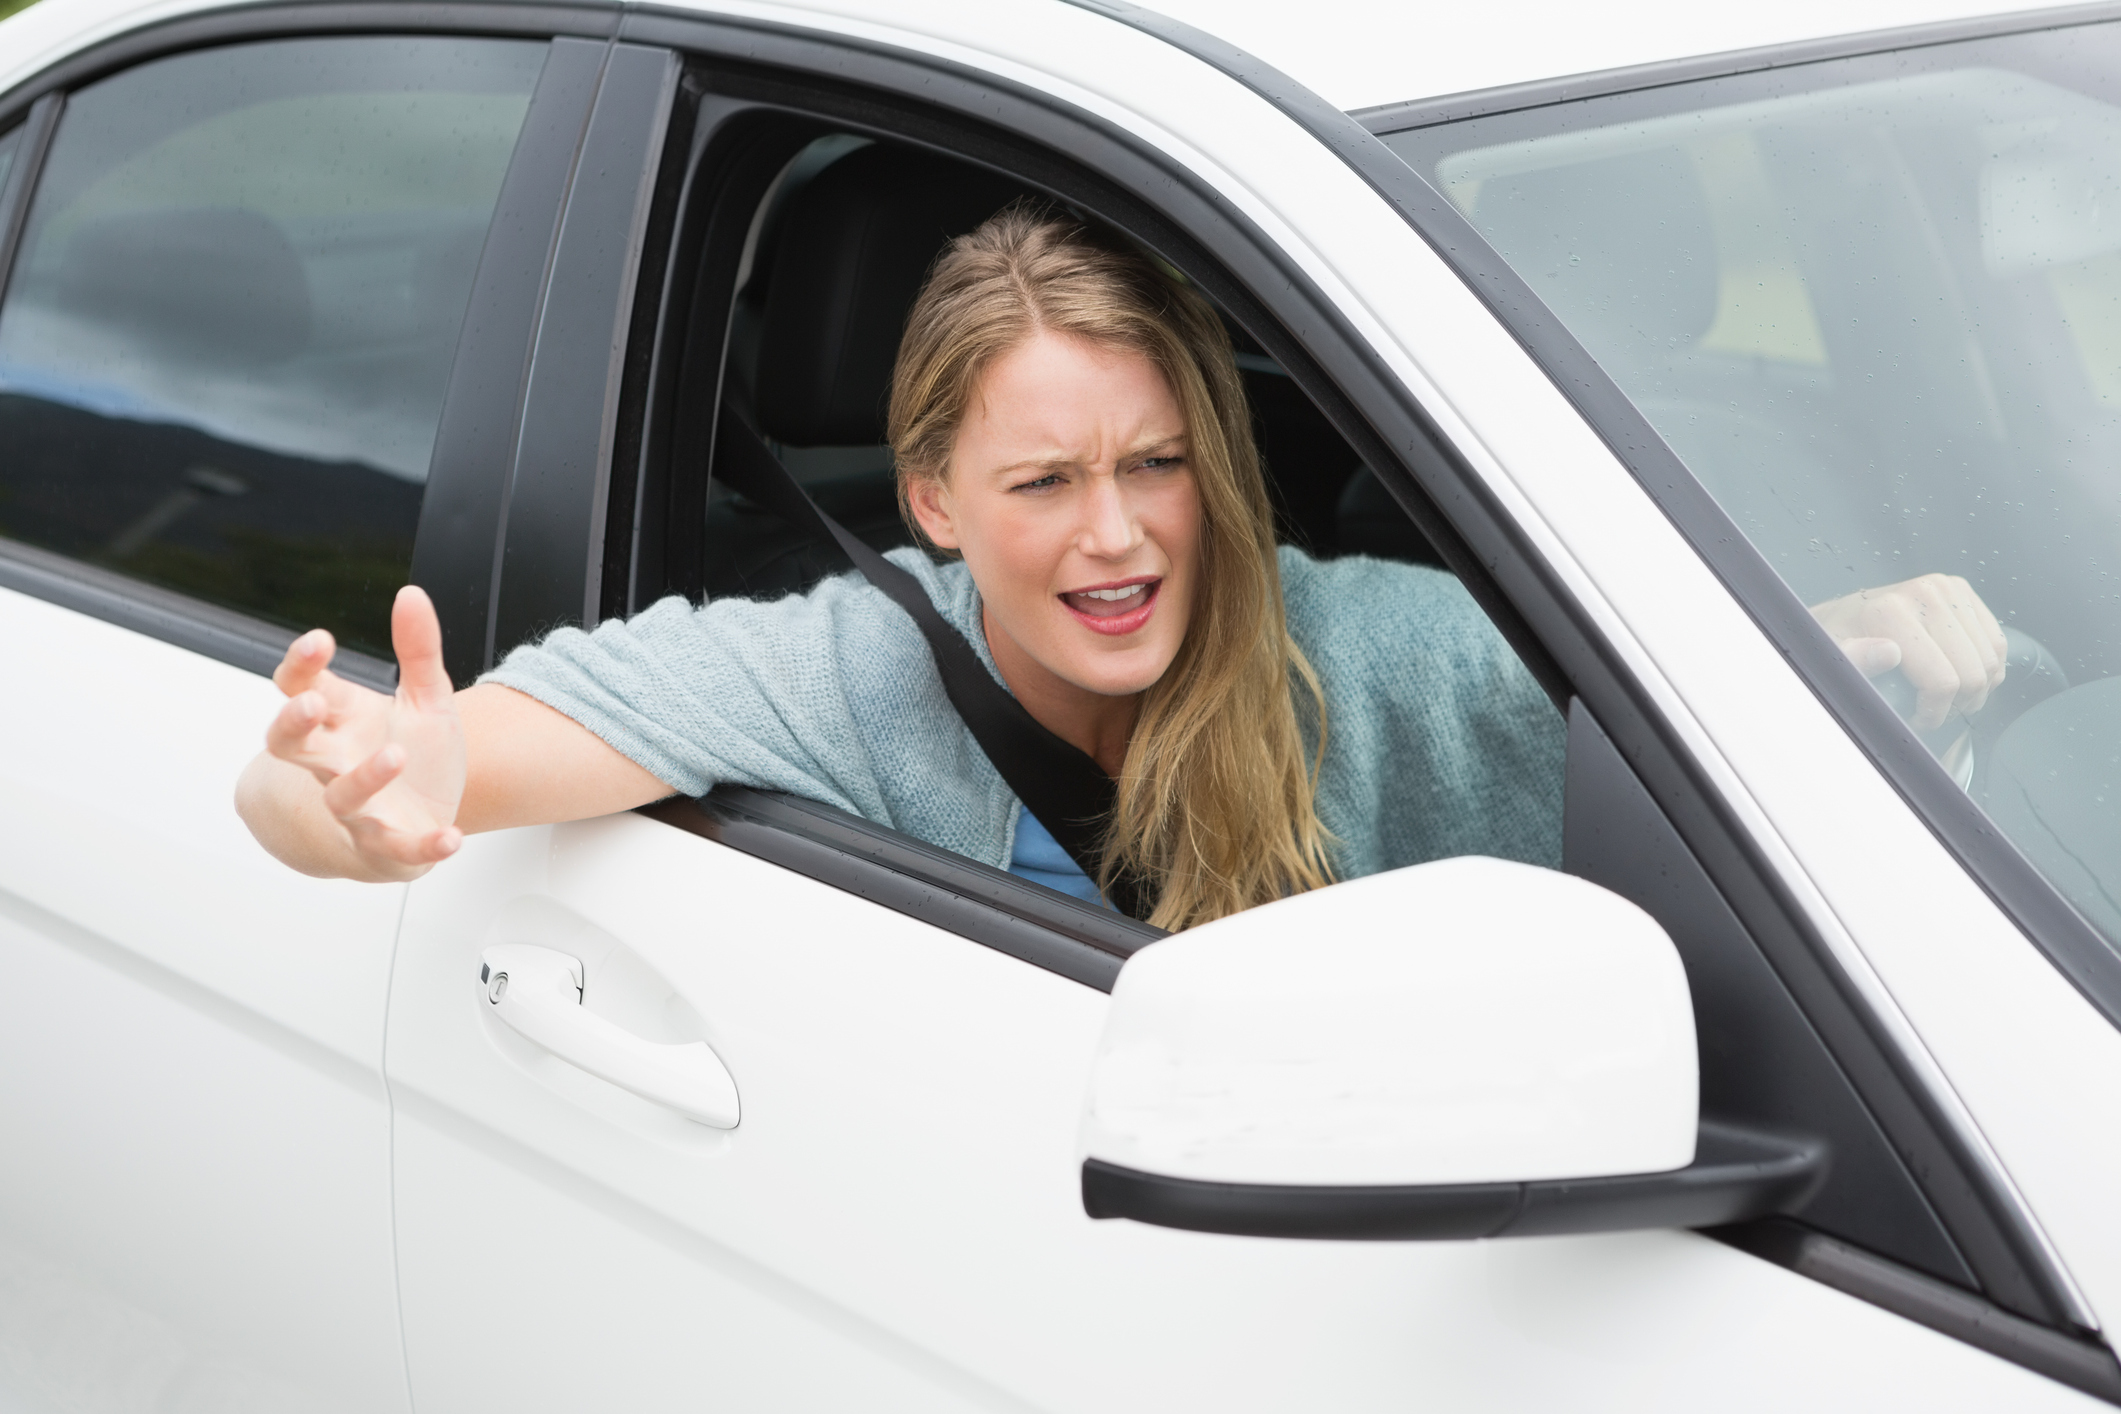 Men or women? Study reveals who the angriest drivers are